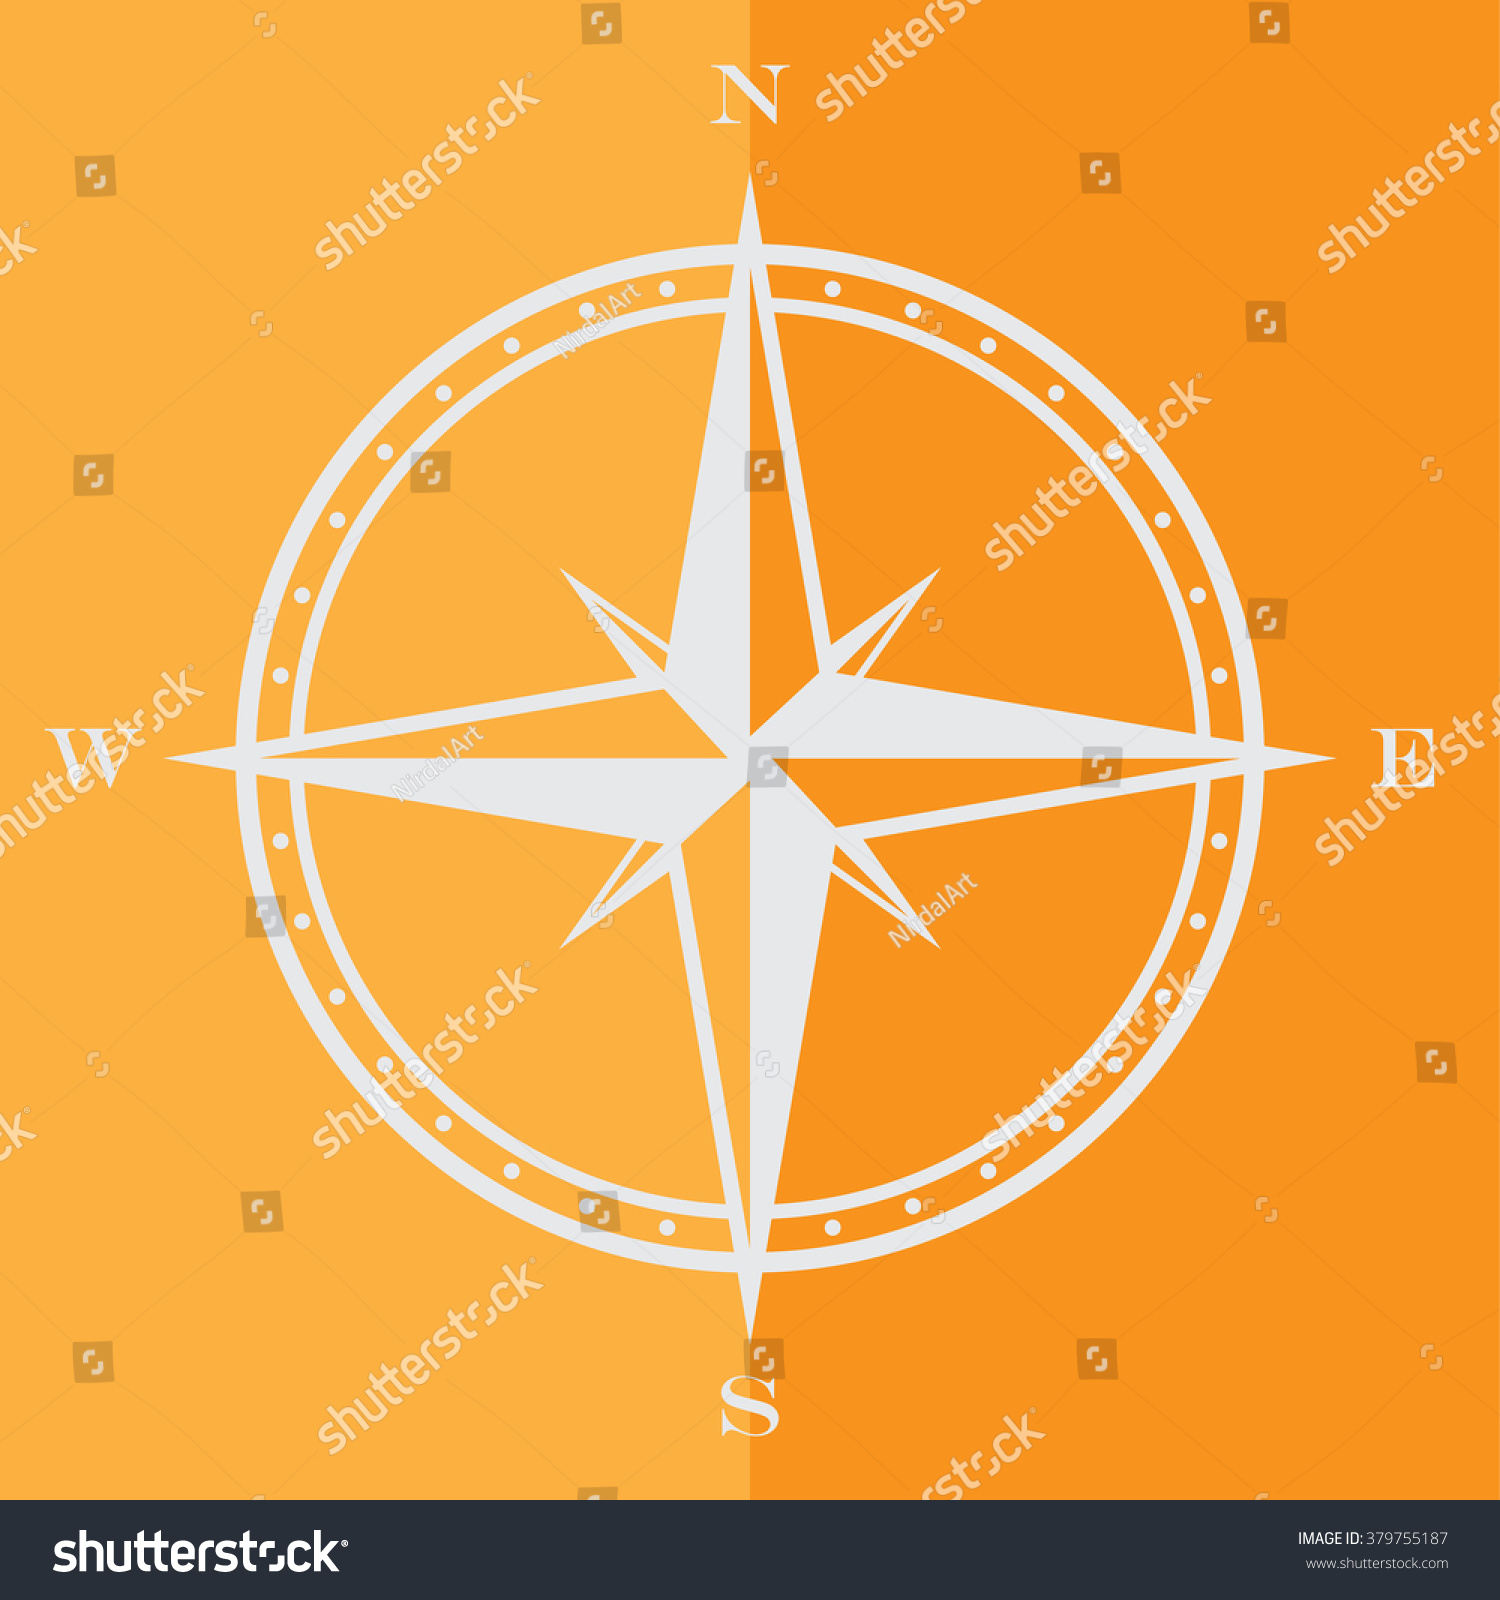 Compass Rose Symbol Stock Vector Royalty Free 379755187 Shutterstock 2900